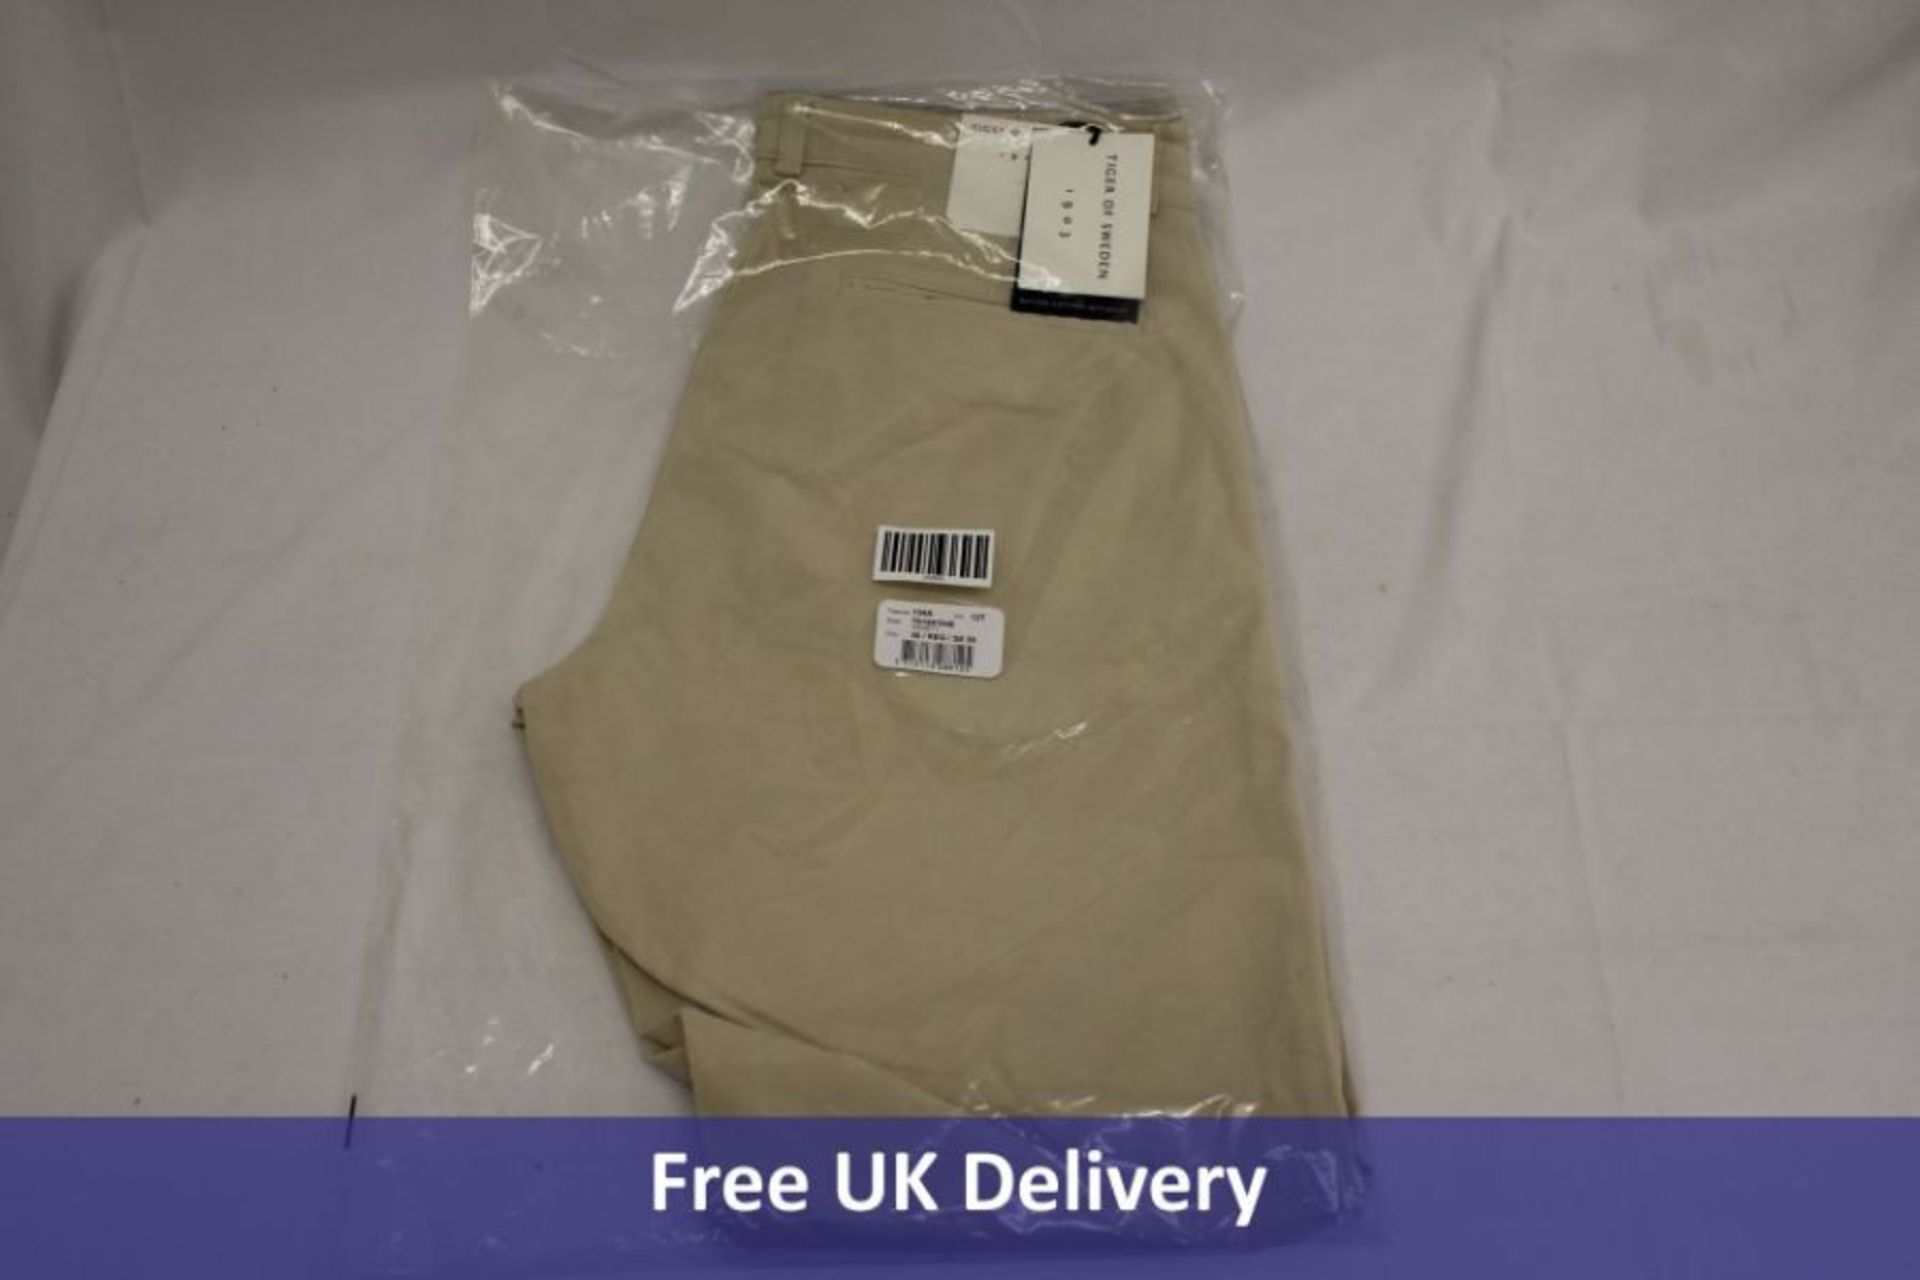 Two Tiger of Sweden Transit 4 Trousers, Sand, 1x Size 54 and 1x Size 56